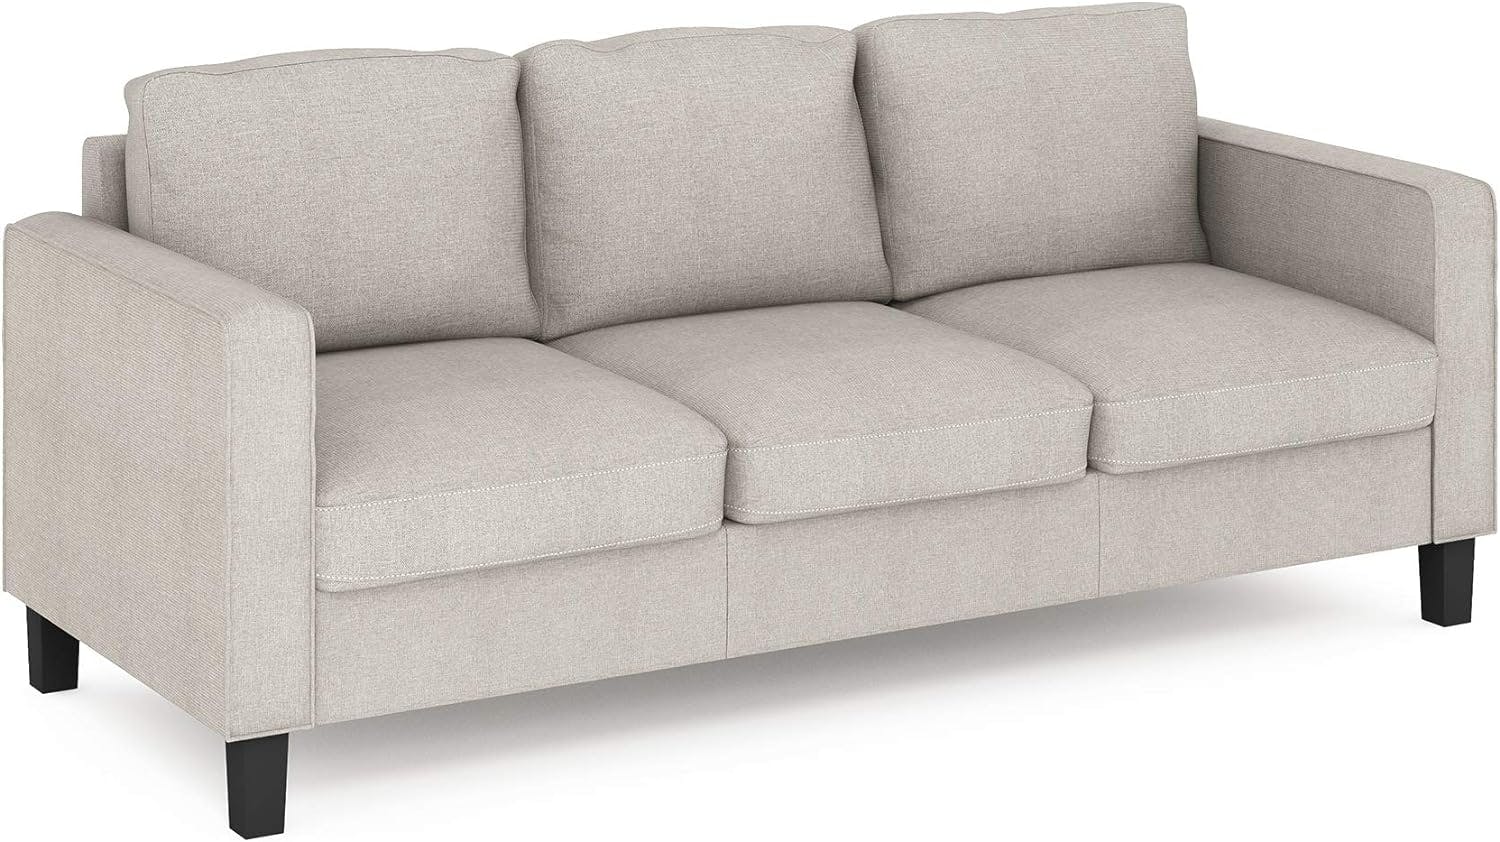 Bayonne Fog Polyester Upholstered 3-Seater Lawson Sofa with Wooden Legs